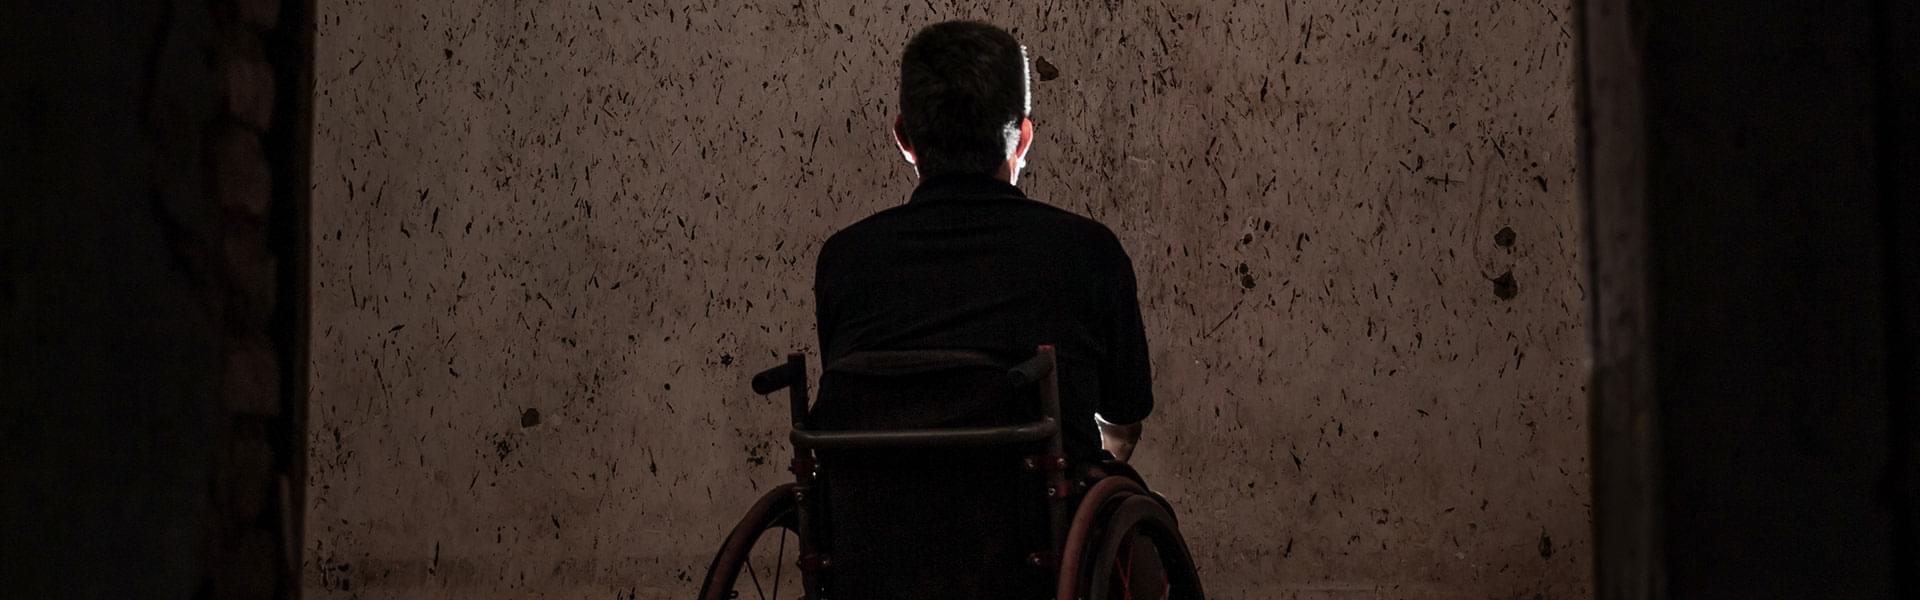 What Are the Biggest Housing Challenges Facing the Disabled?